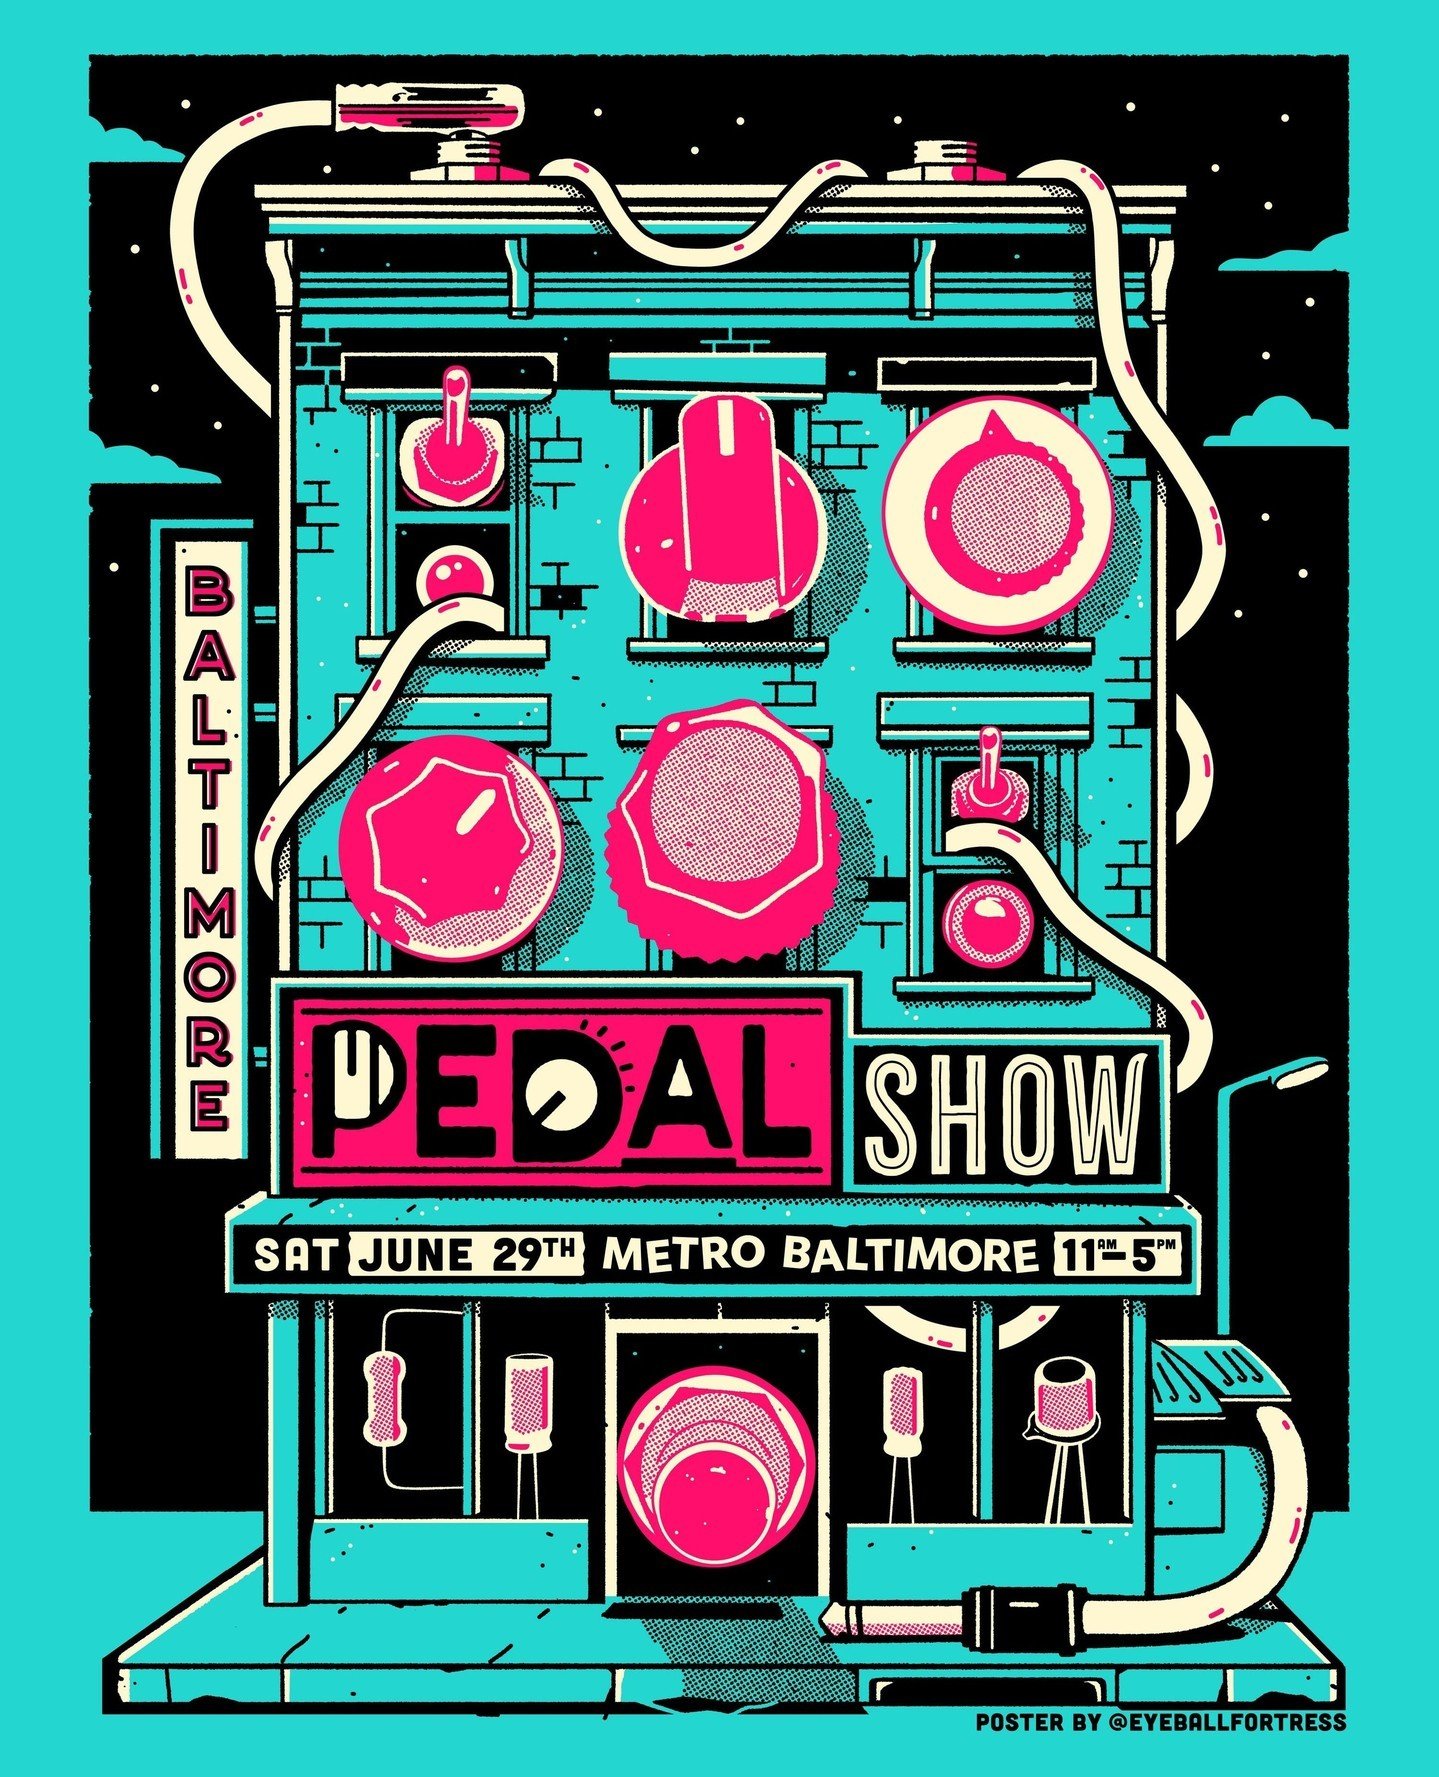 Very stoked to have worked on the poster for the first Baltimore Pedal Show!⁠
⁠
Mark your calendars folks! On June 29th pedal builders from all over the country will converge at @metro_baltimore to demo their gear and talk shop. You&rsquo;ll be able 